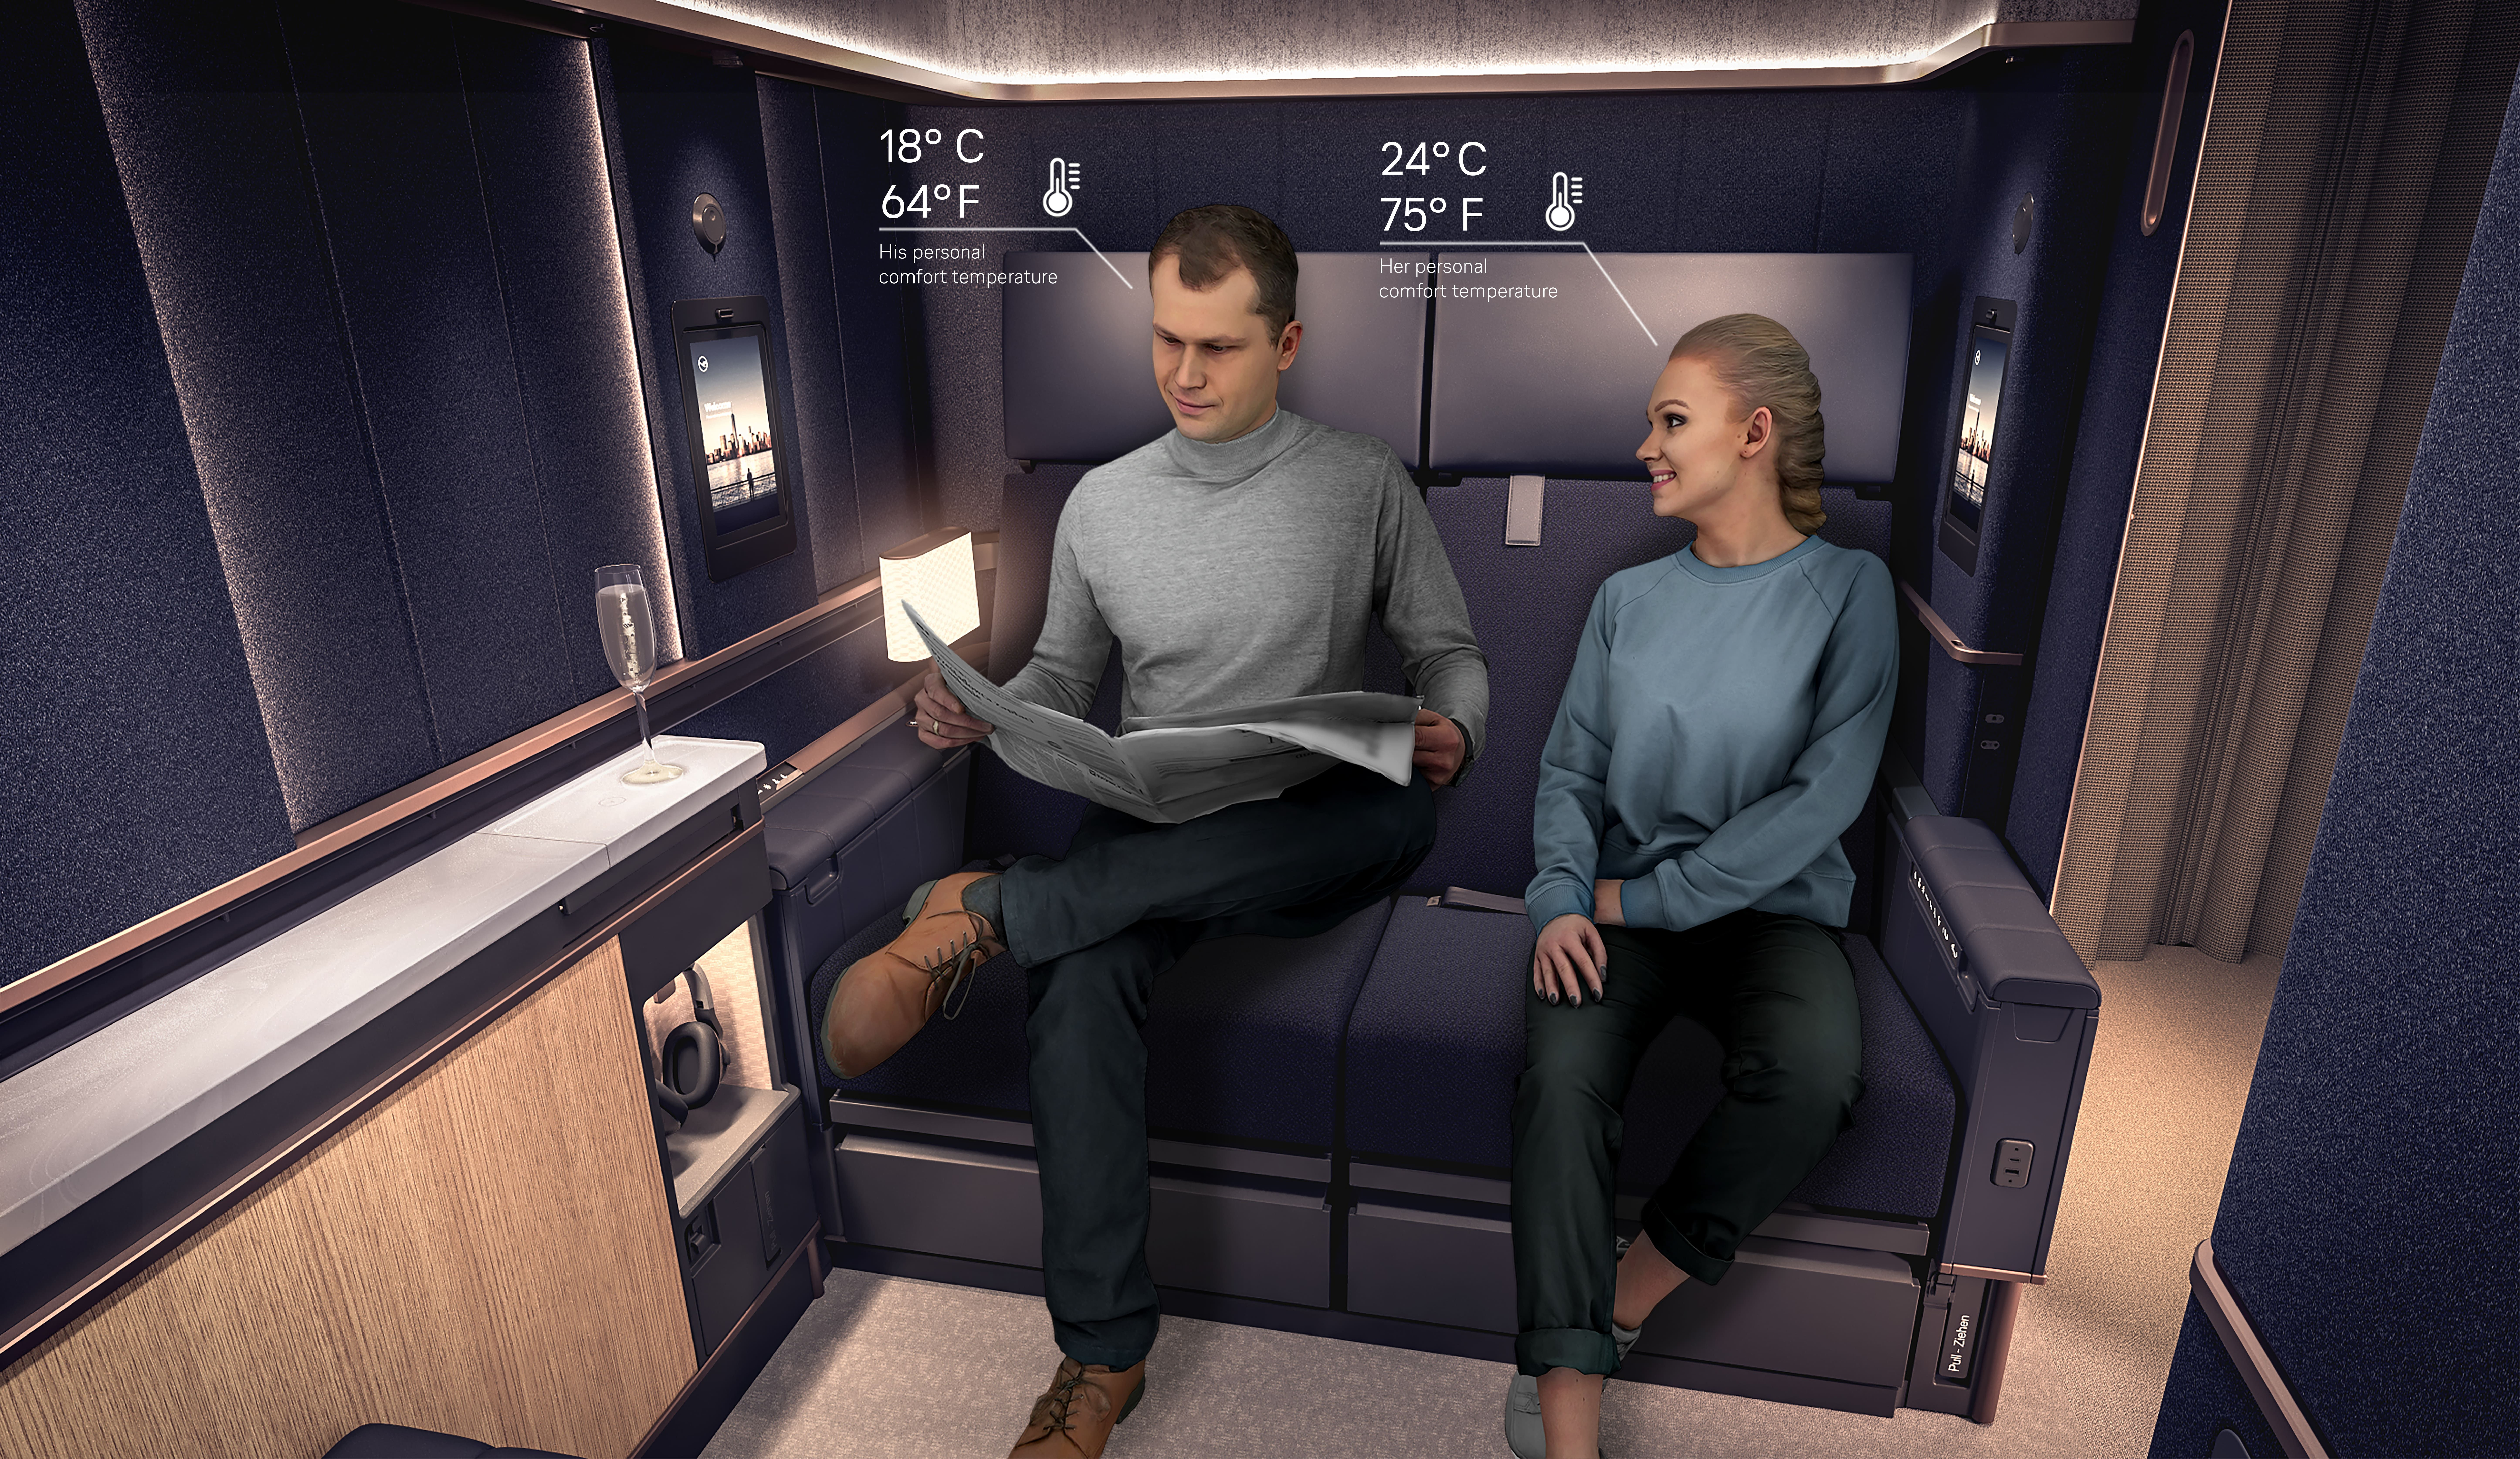 Lufthansa's new first class cabin, showing a man and woman sitting next to each other and numbers to show different temperatures for each seat.